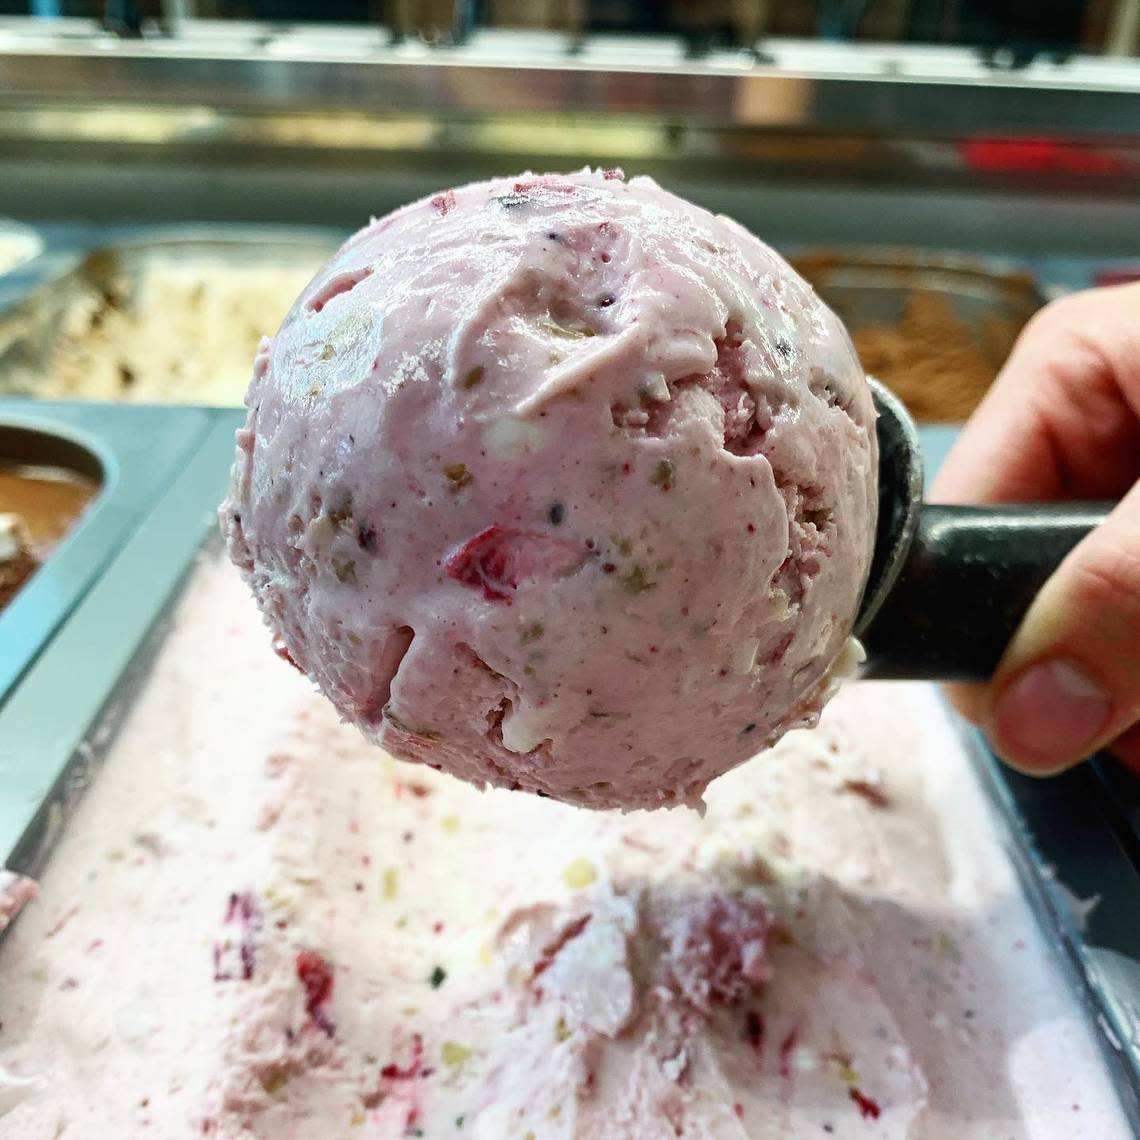 Creativity is a given at The Stil. Last Thanksgiving, this ice cream was sold including cranberry, goat cheese, walnuts, and rosemary.